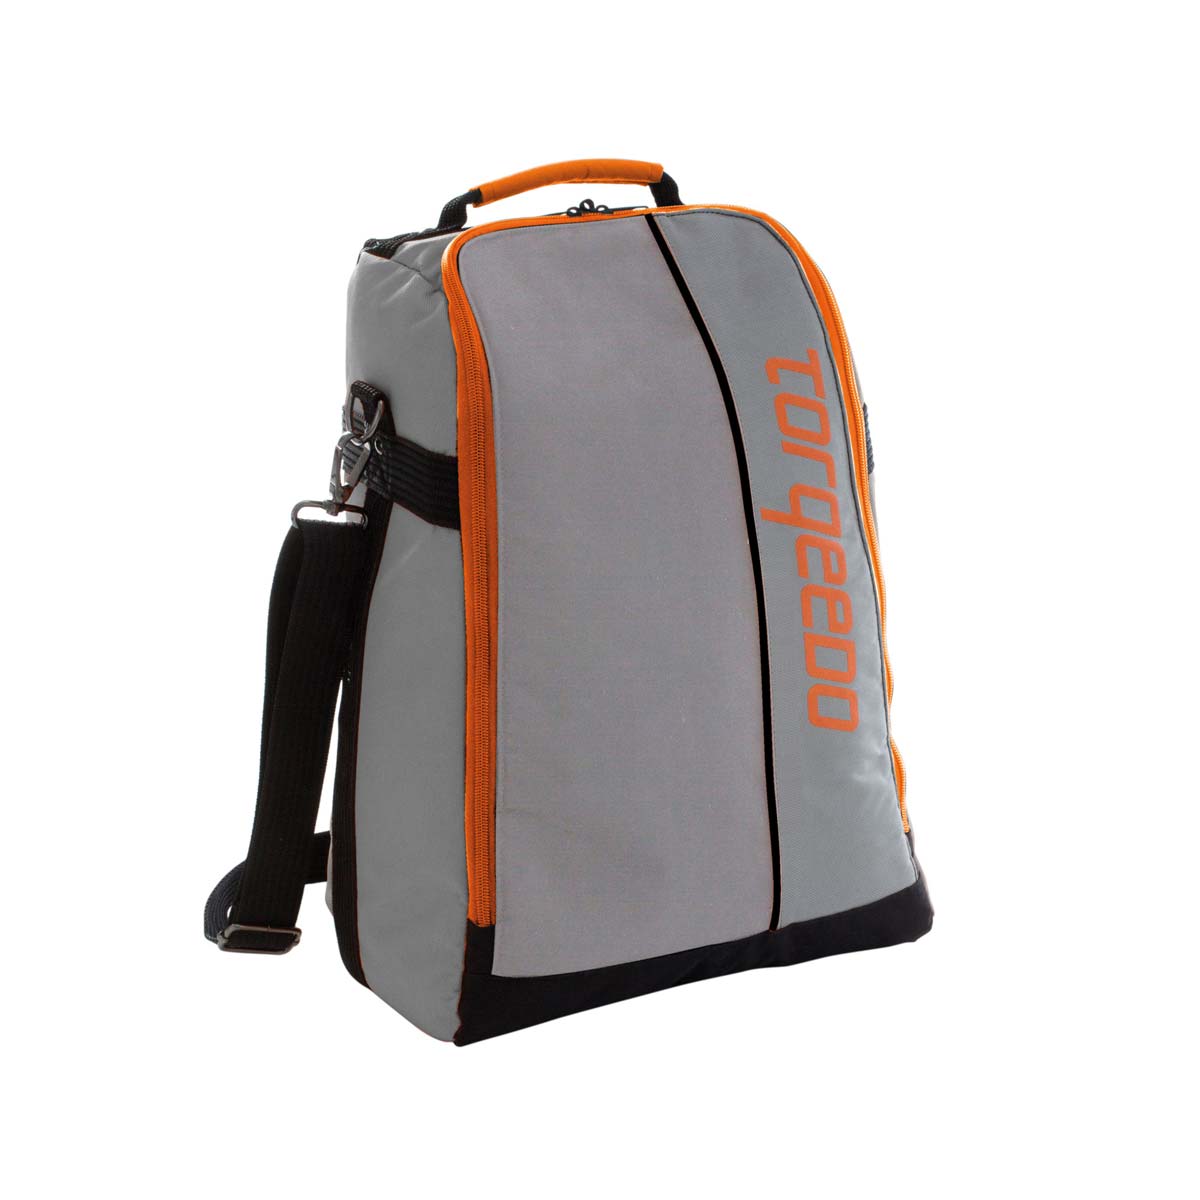 Torqeedo Travel Bag for 915 Wh Spare Battery